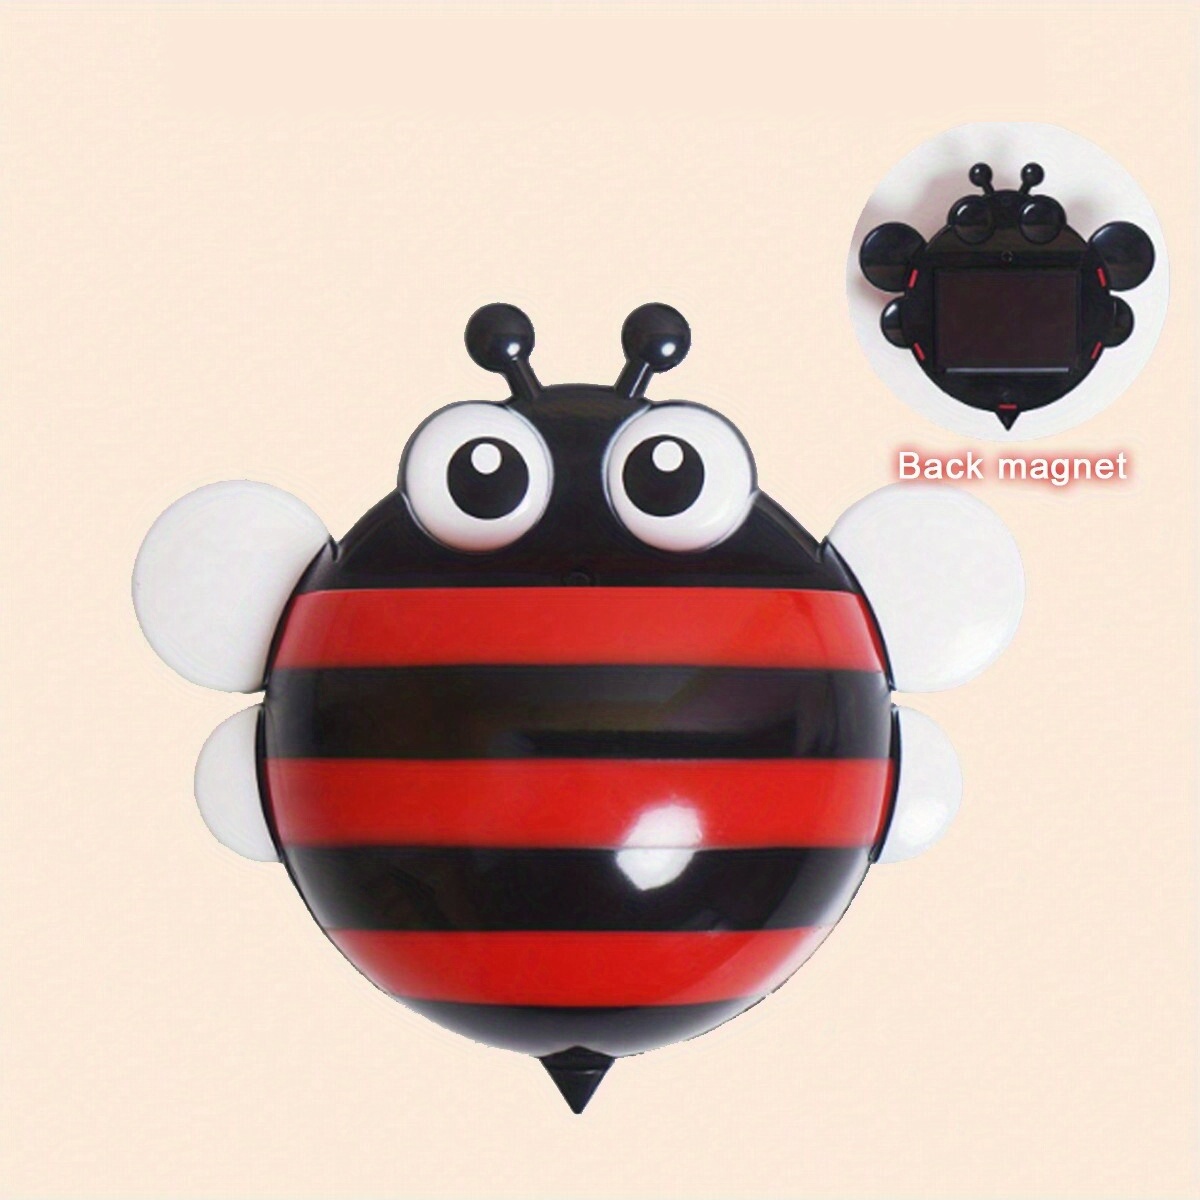 

Magnetic Bee Cartoon Wall-mounted Whiteboard Pencil Holder Chalk Box Office Teaching Home Storage Container Pp Material - 1pc